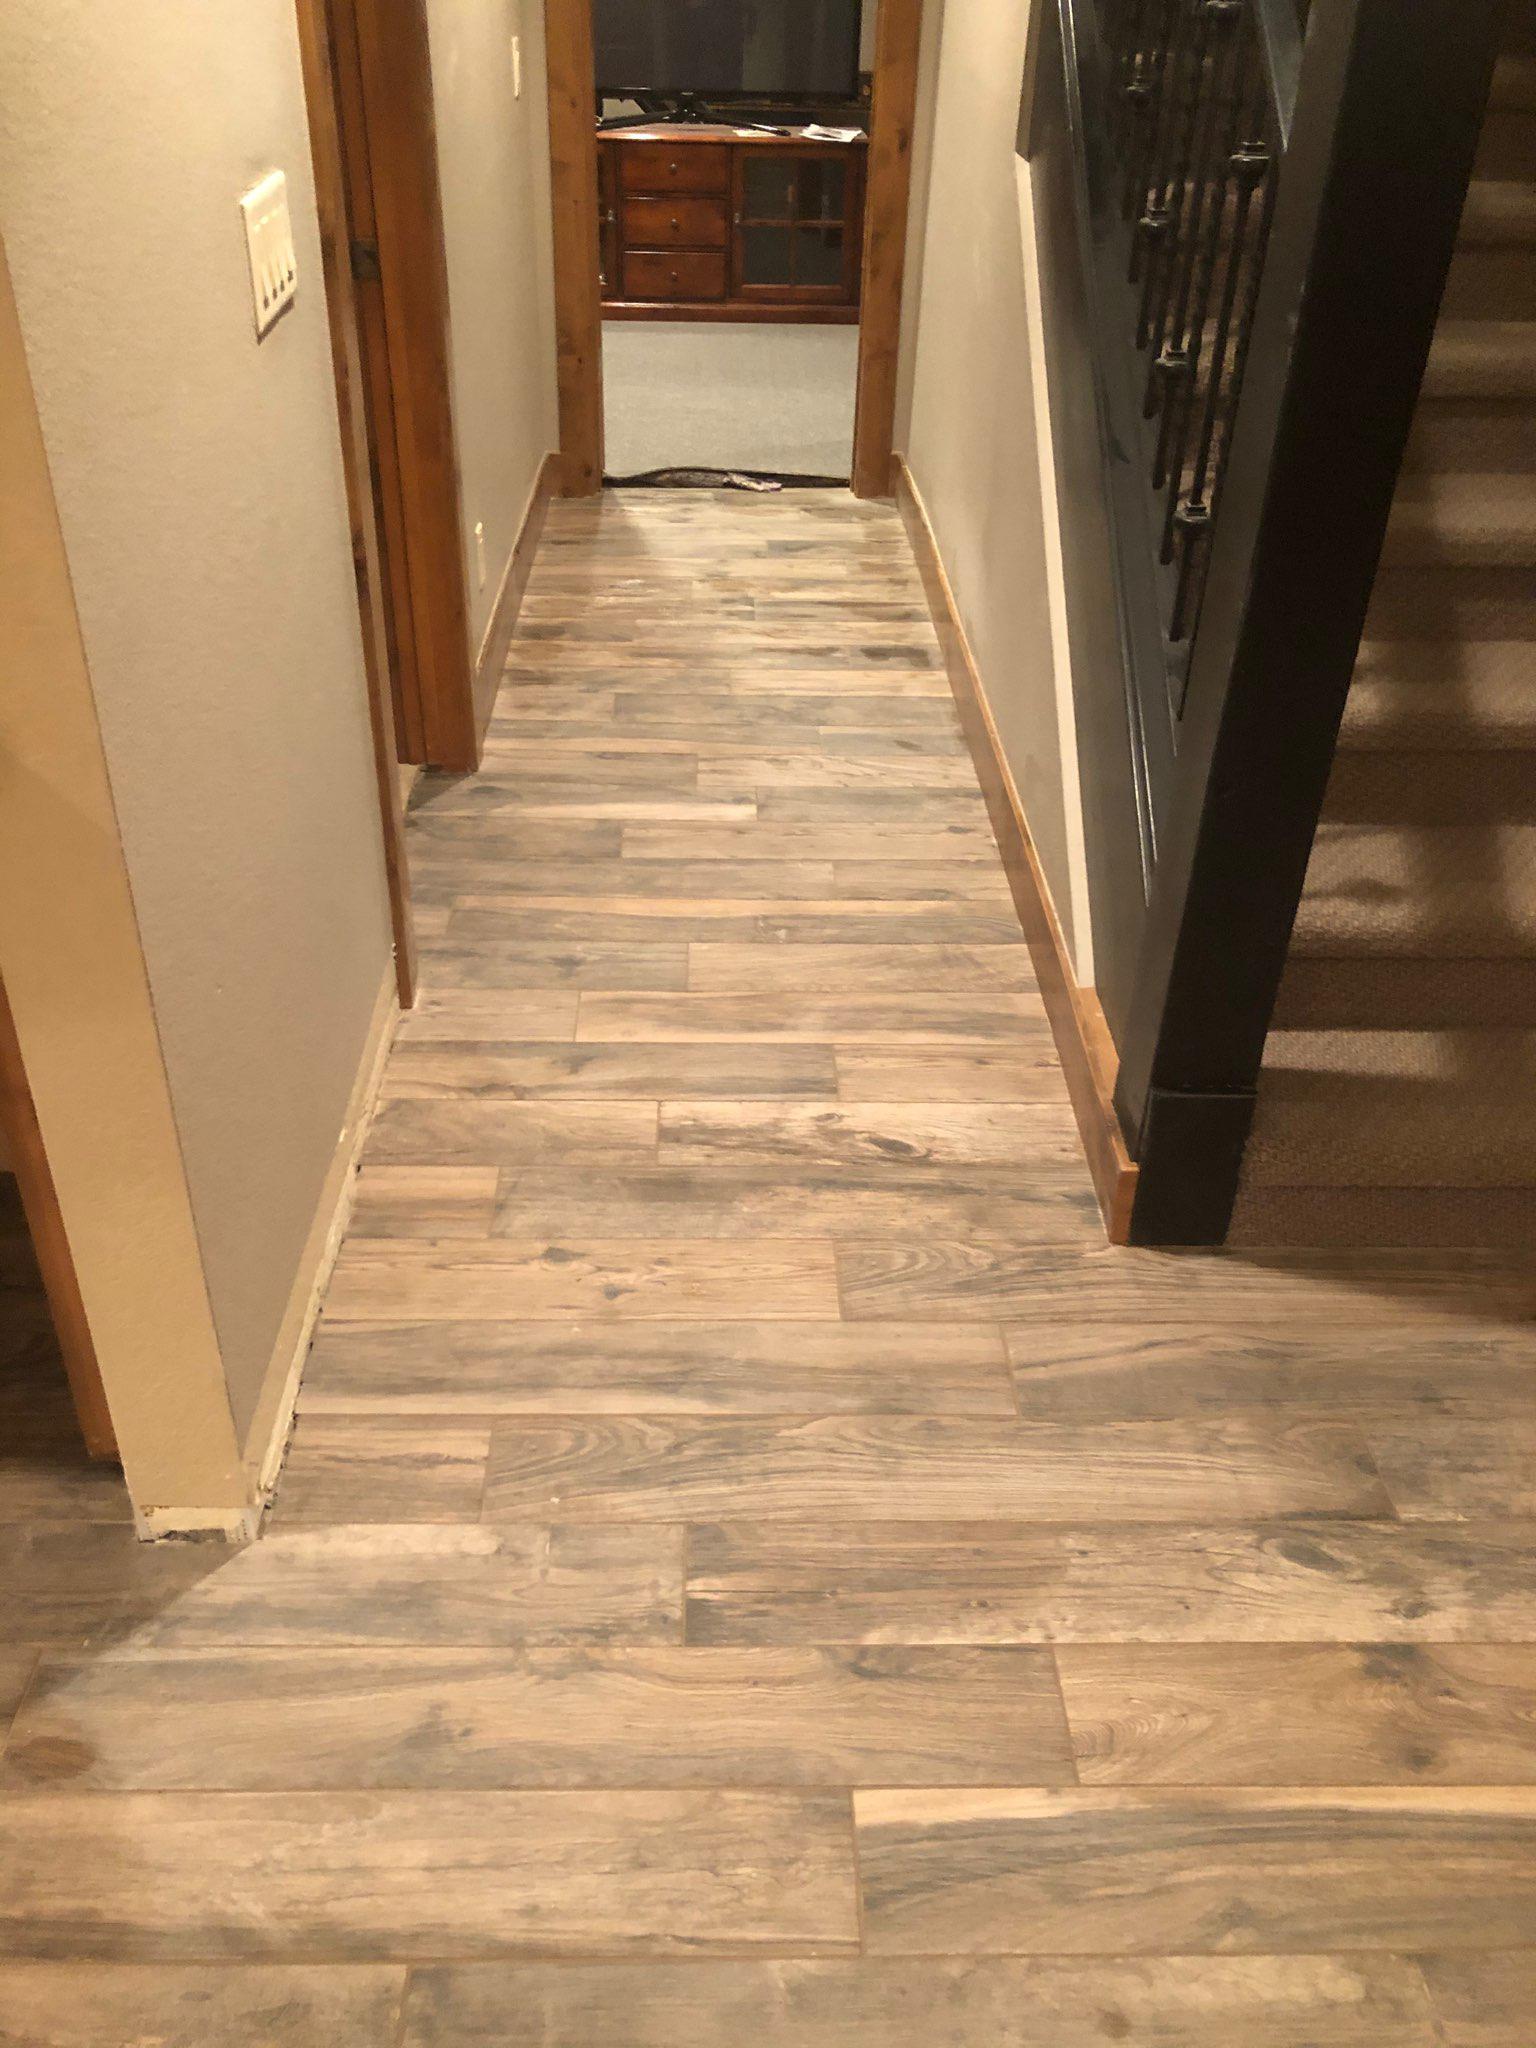 Wow!!! This project we did out in Tempe was a fun one! We installed Tile Flooring and love how it looks in this house. In this project we removed carpet and replaced it with Tile. Call Home Solutionz Today For Your Flooring Project <(623) 289-3880>. Home Solutionz - Tempe is Licensed, Bonded, and Insured. Home Solutionz offers 12 - 24 Months 0% Financing Through Wells Fargo. Home Solutionz Tempe - 3125 S 52nd St, Suite 107 Tempe, AZ 85282 United States  TileFloor  FloorInstallation  Flooring